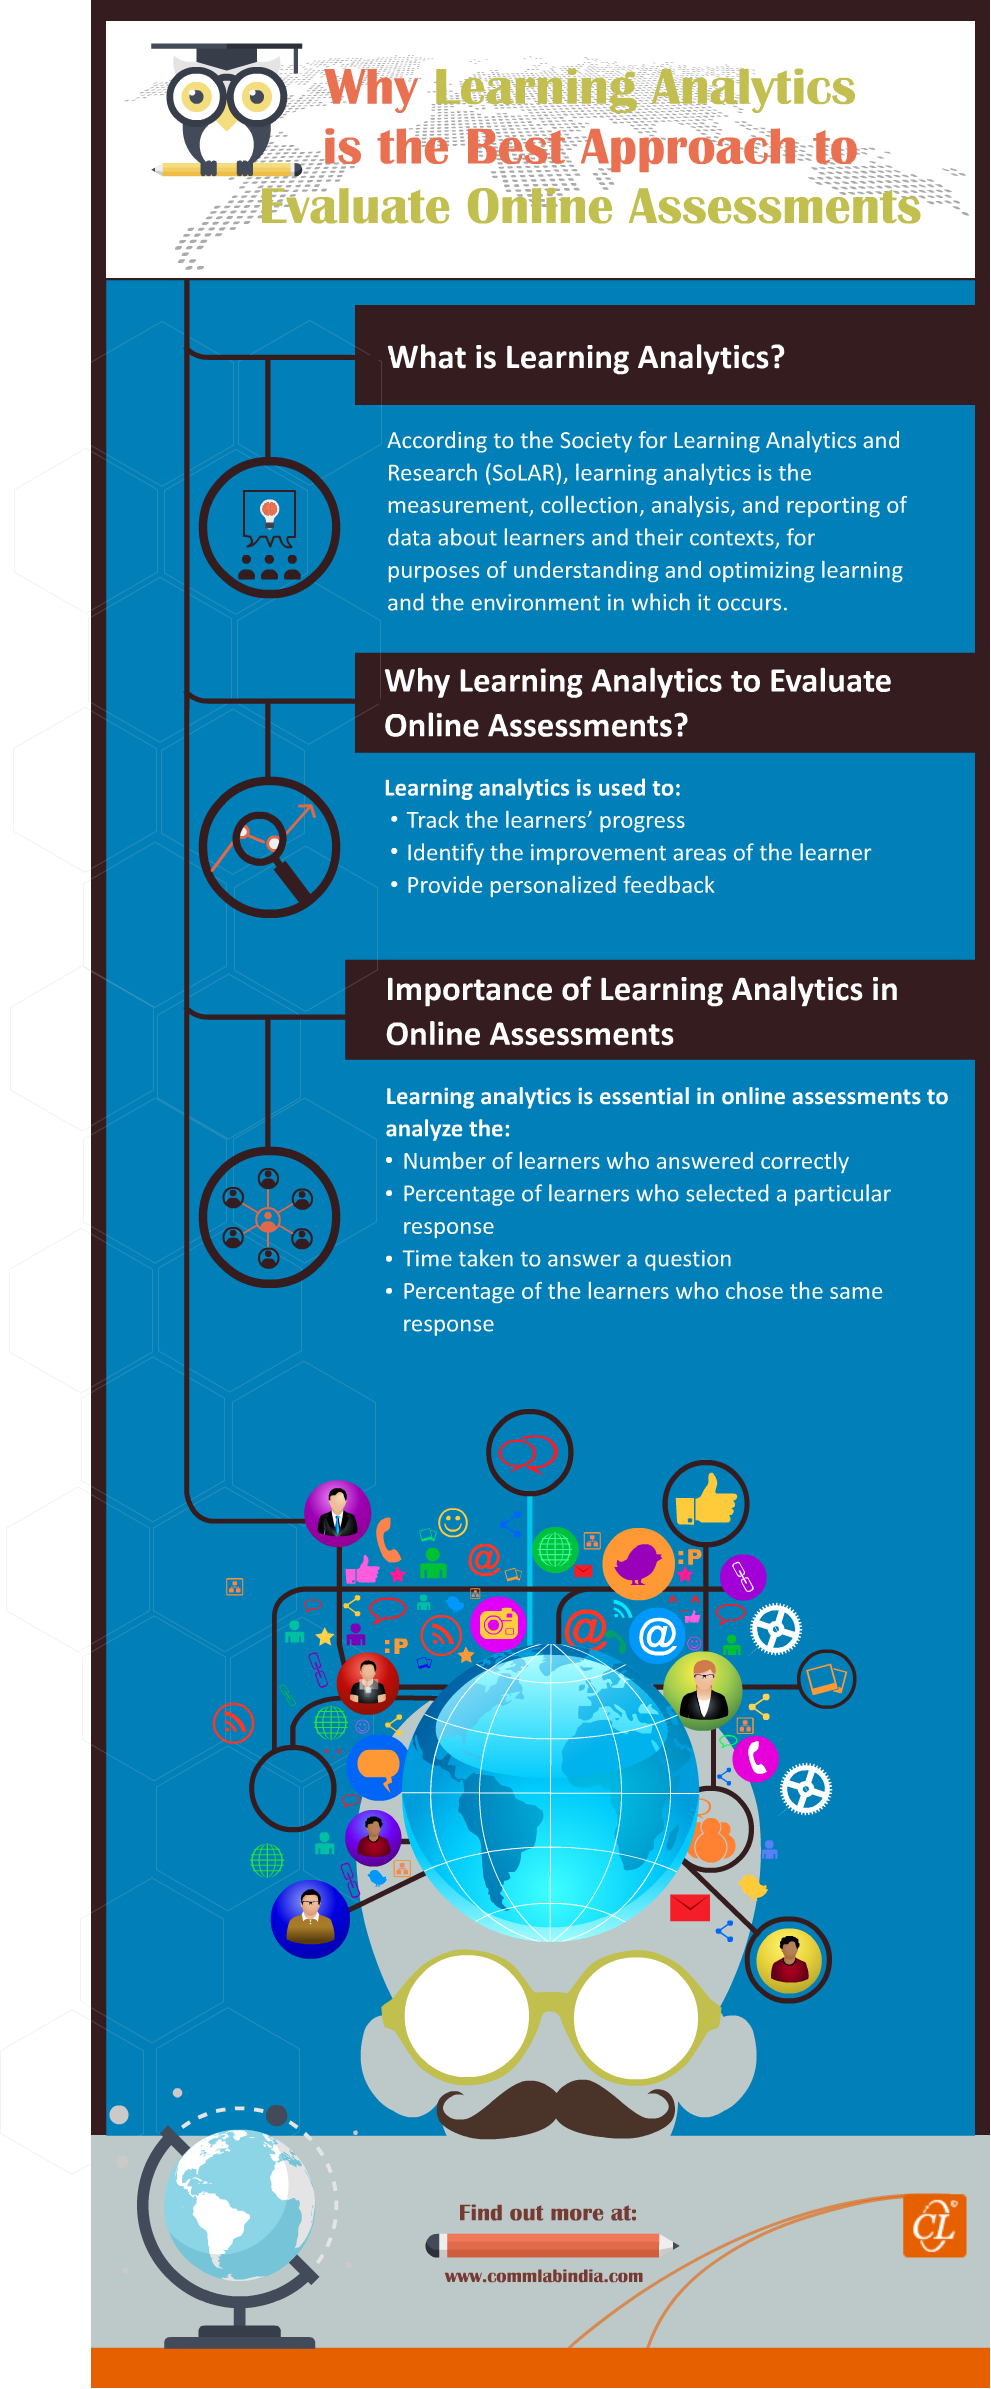 Why Learning Analytics is the Best Approach to Evaluate Online Assessments[Infographic]